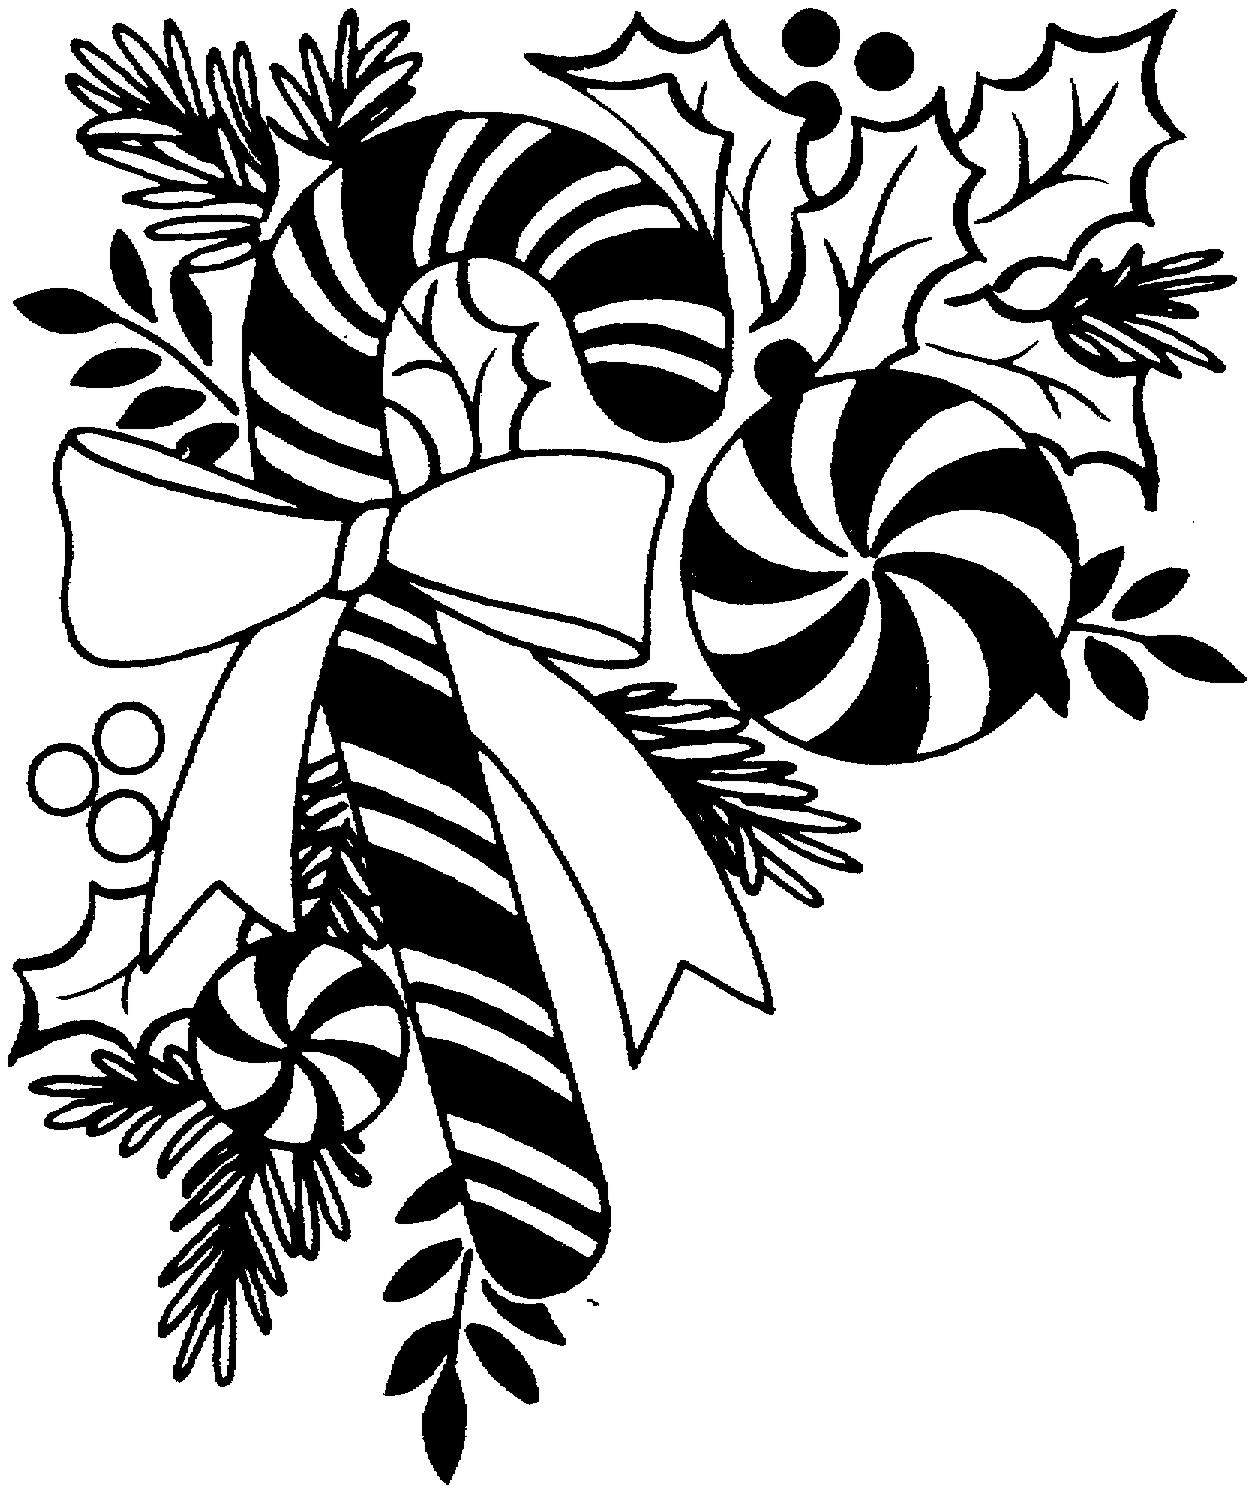 Free Christmas Icon Black And White, Download Free Clip Art, Free Clip Art on Clipart Library